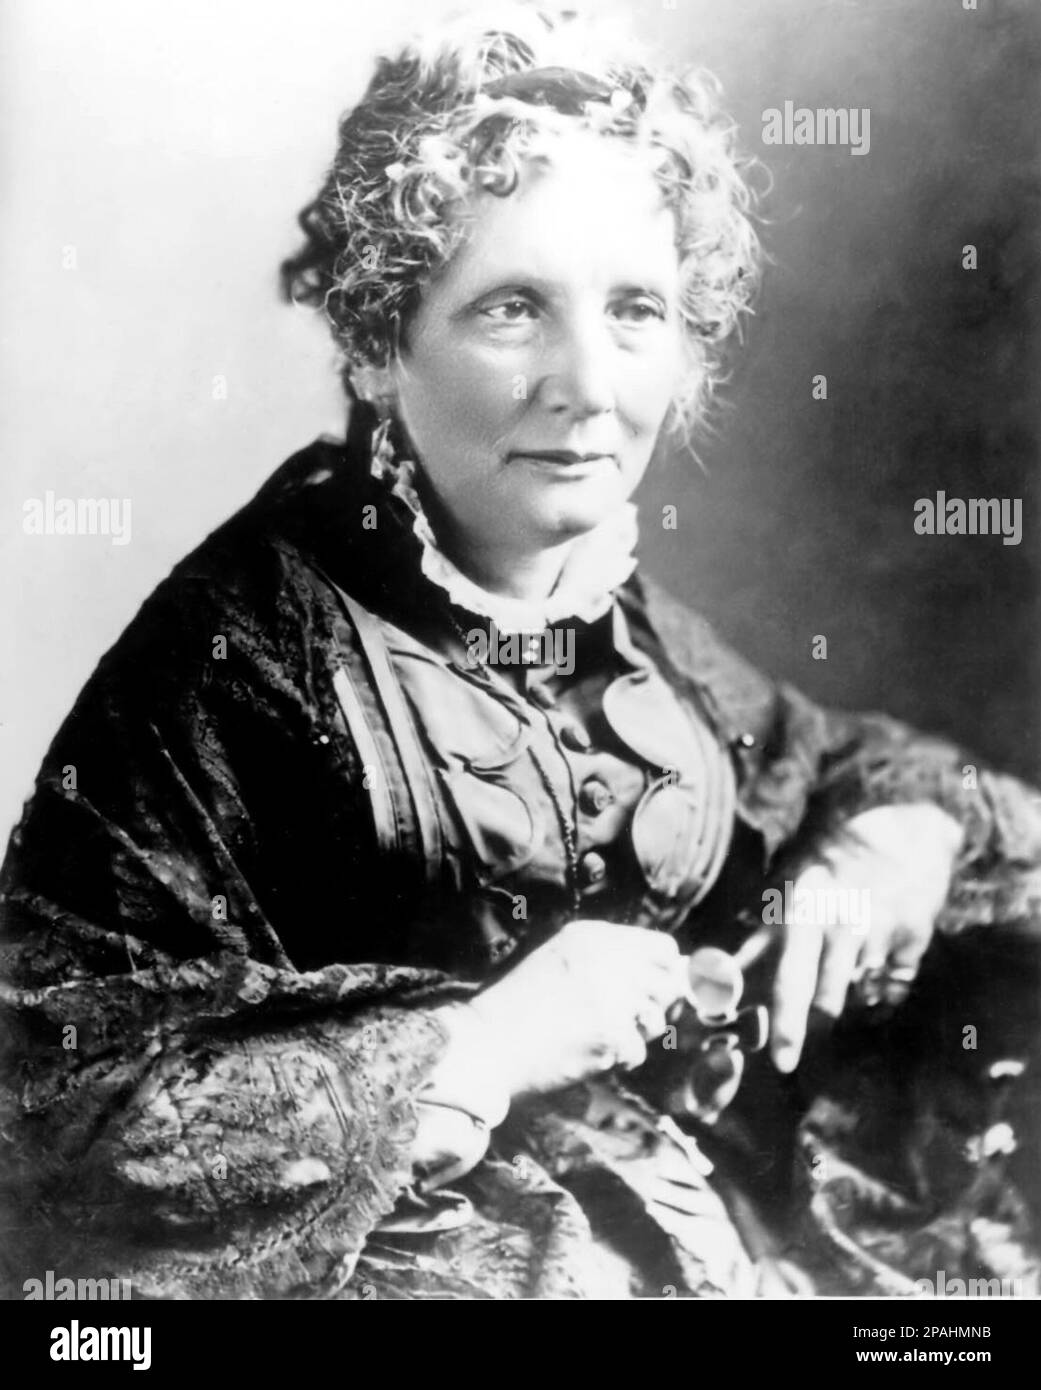 The american abolitionist and novelist , woman writer , HARRIET BEECHER STOWE ( 1811 - 1896 ) author of most celebrated book UNCLE TOM 'S CABIN ( 1852 ) attacked the cruelty of slavery; it reached millions as a novel and play, and became influential, even in Britain. It made the political issues of the 1850s regarding slavery tangible to millions, energizing anti-slavery forces in the American North. It angered and embittered the South. The impact is summed up in a commonly quoted statement apocryphally attributed to Abraham Lincoln. When he met Stowe, it is claimed that he said, 'So you're th Stock Photo